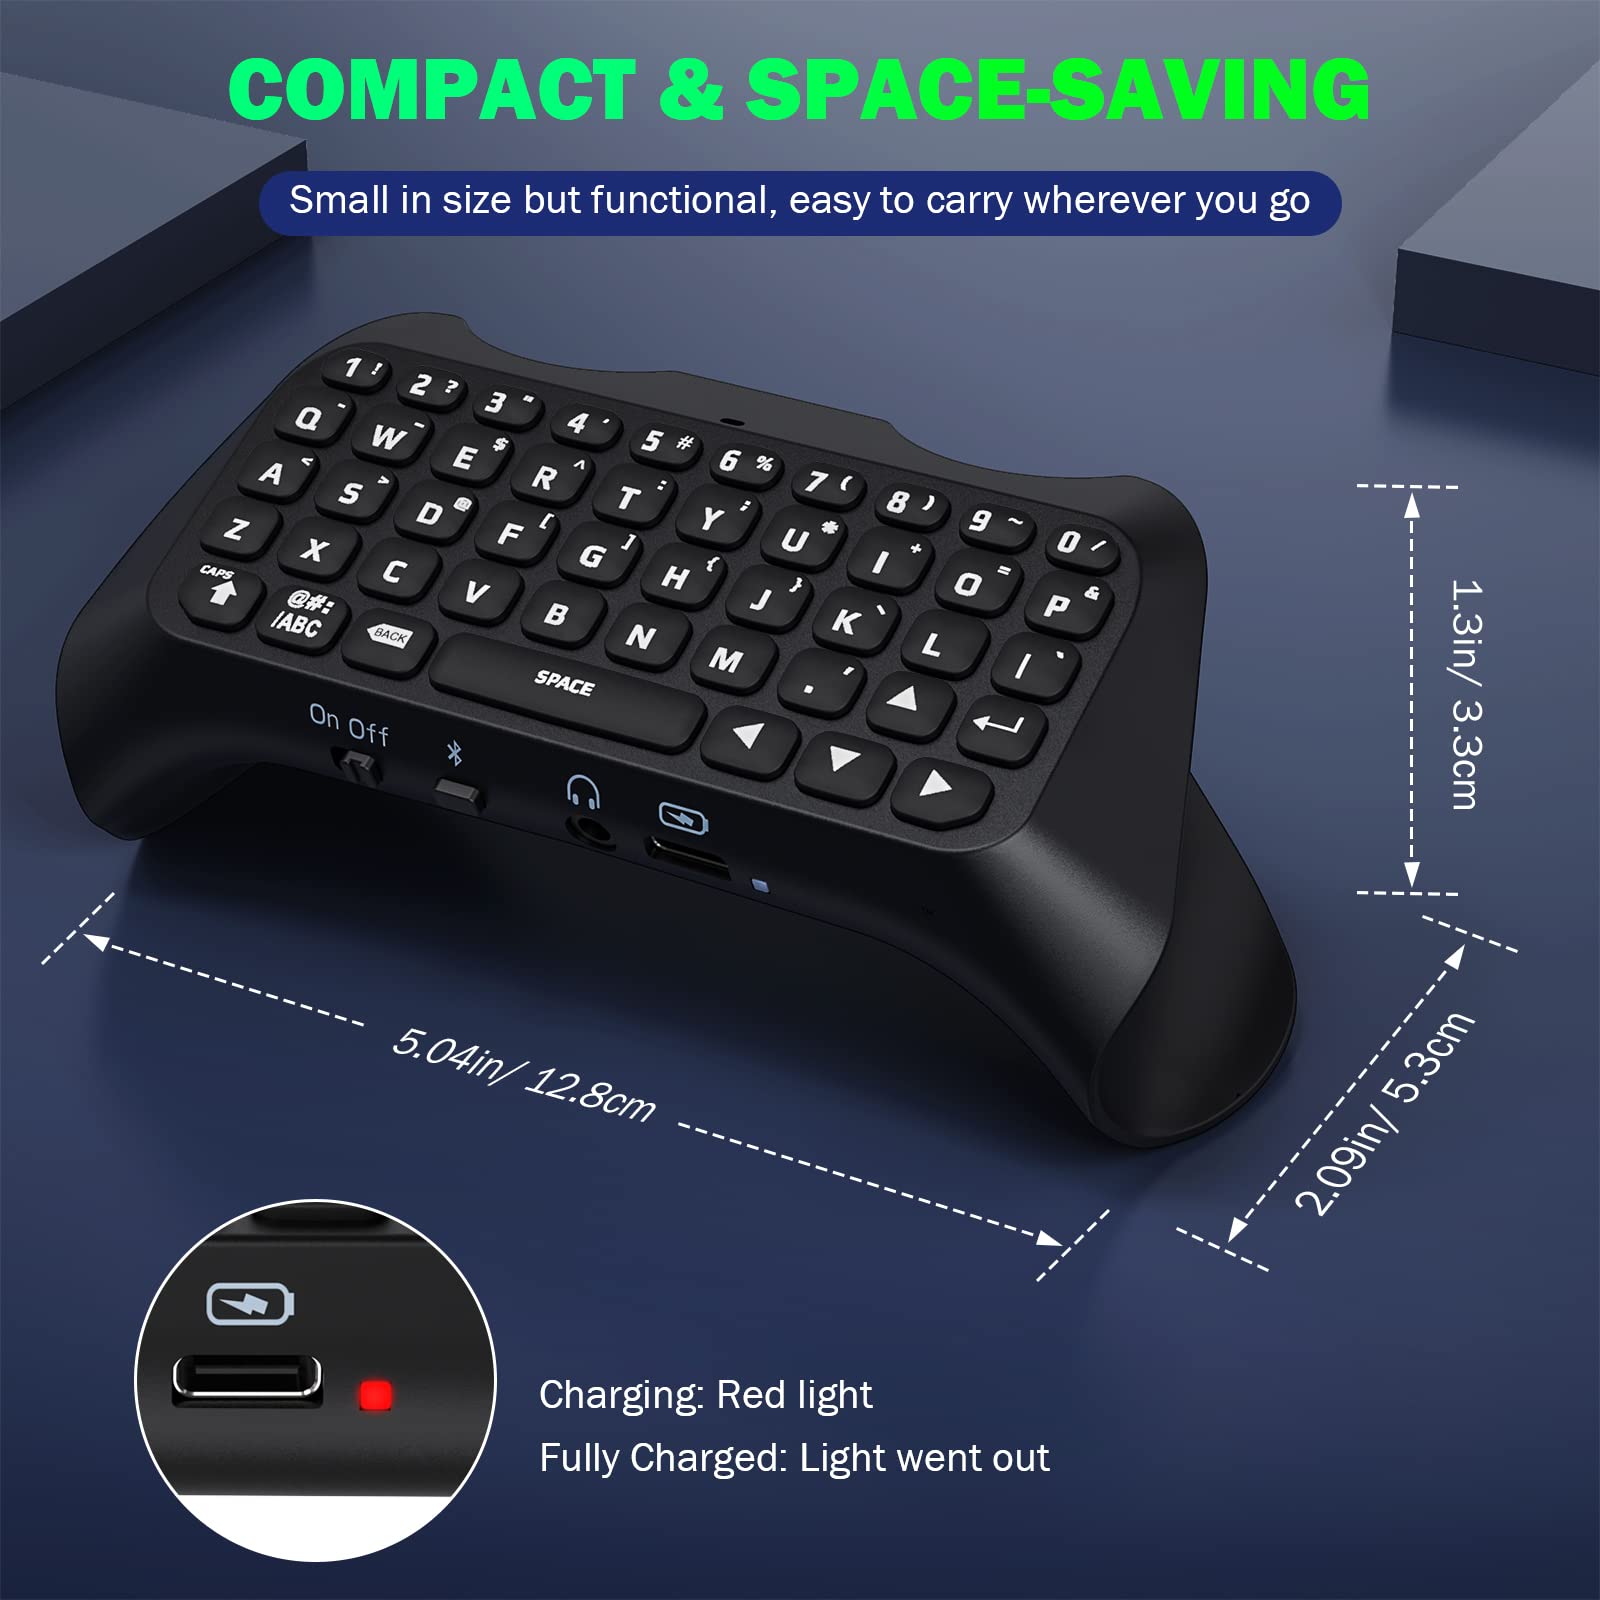 MoKo Keyboard for PS5 Controller with Green Backlight, Bluetooth Wireless Mini Keypad Chatpad for Playstation 5, Built-in Speaker & 3.5mm Audio Jack for PS5 Controller Accessories